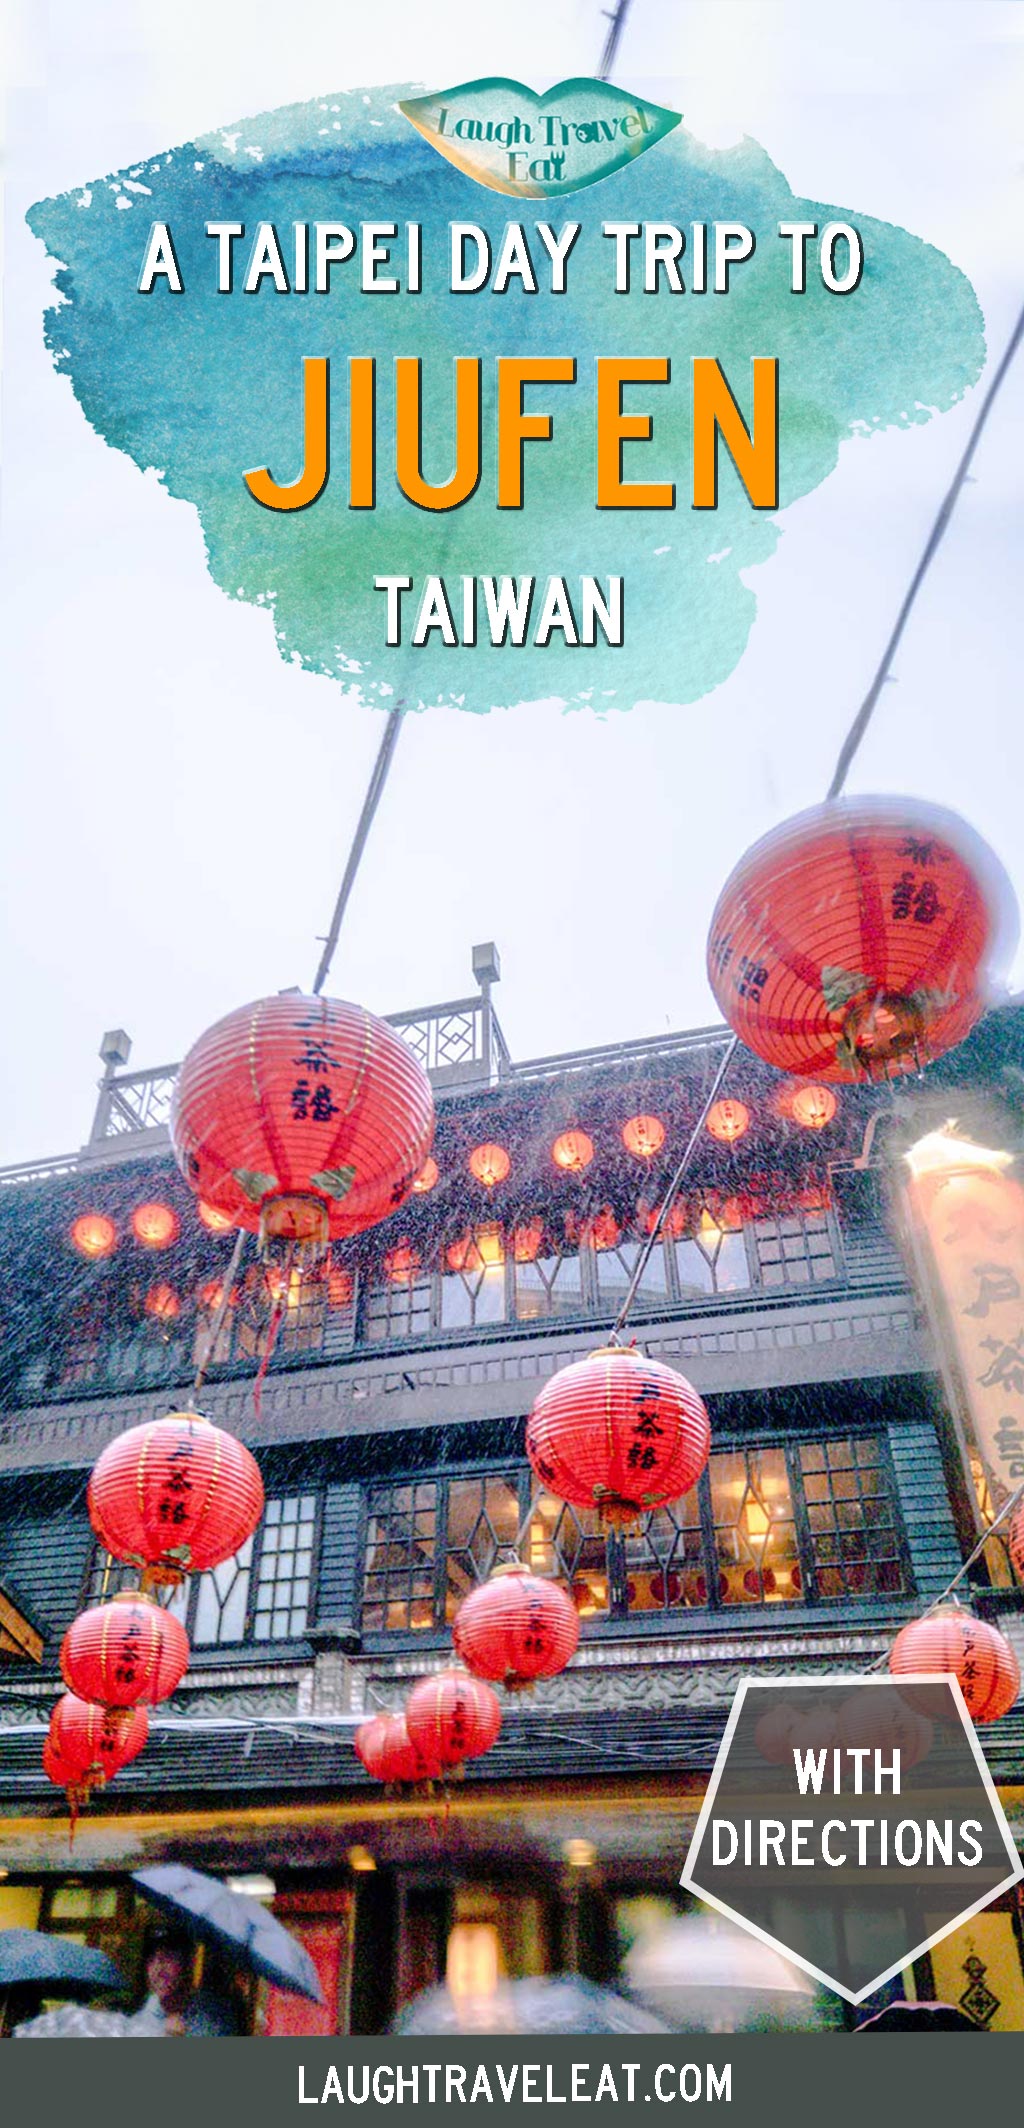 Taipei to Jiufen is a perfect day trip. Here's a guide on how to get to Jiufen as well as what to see around Jiufen Old Street: